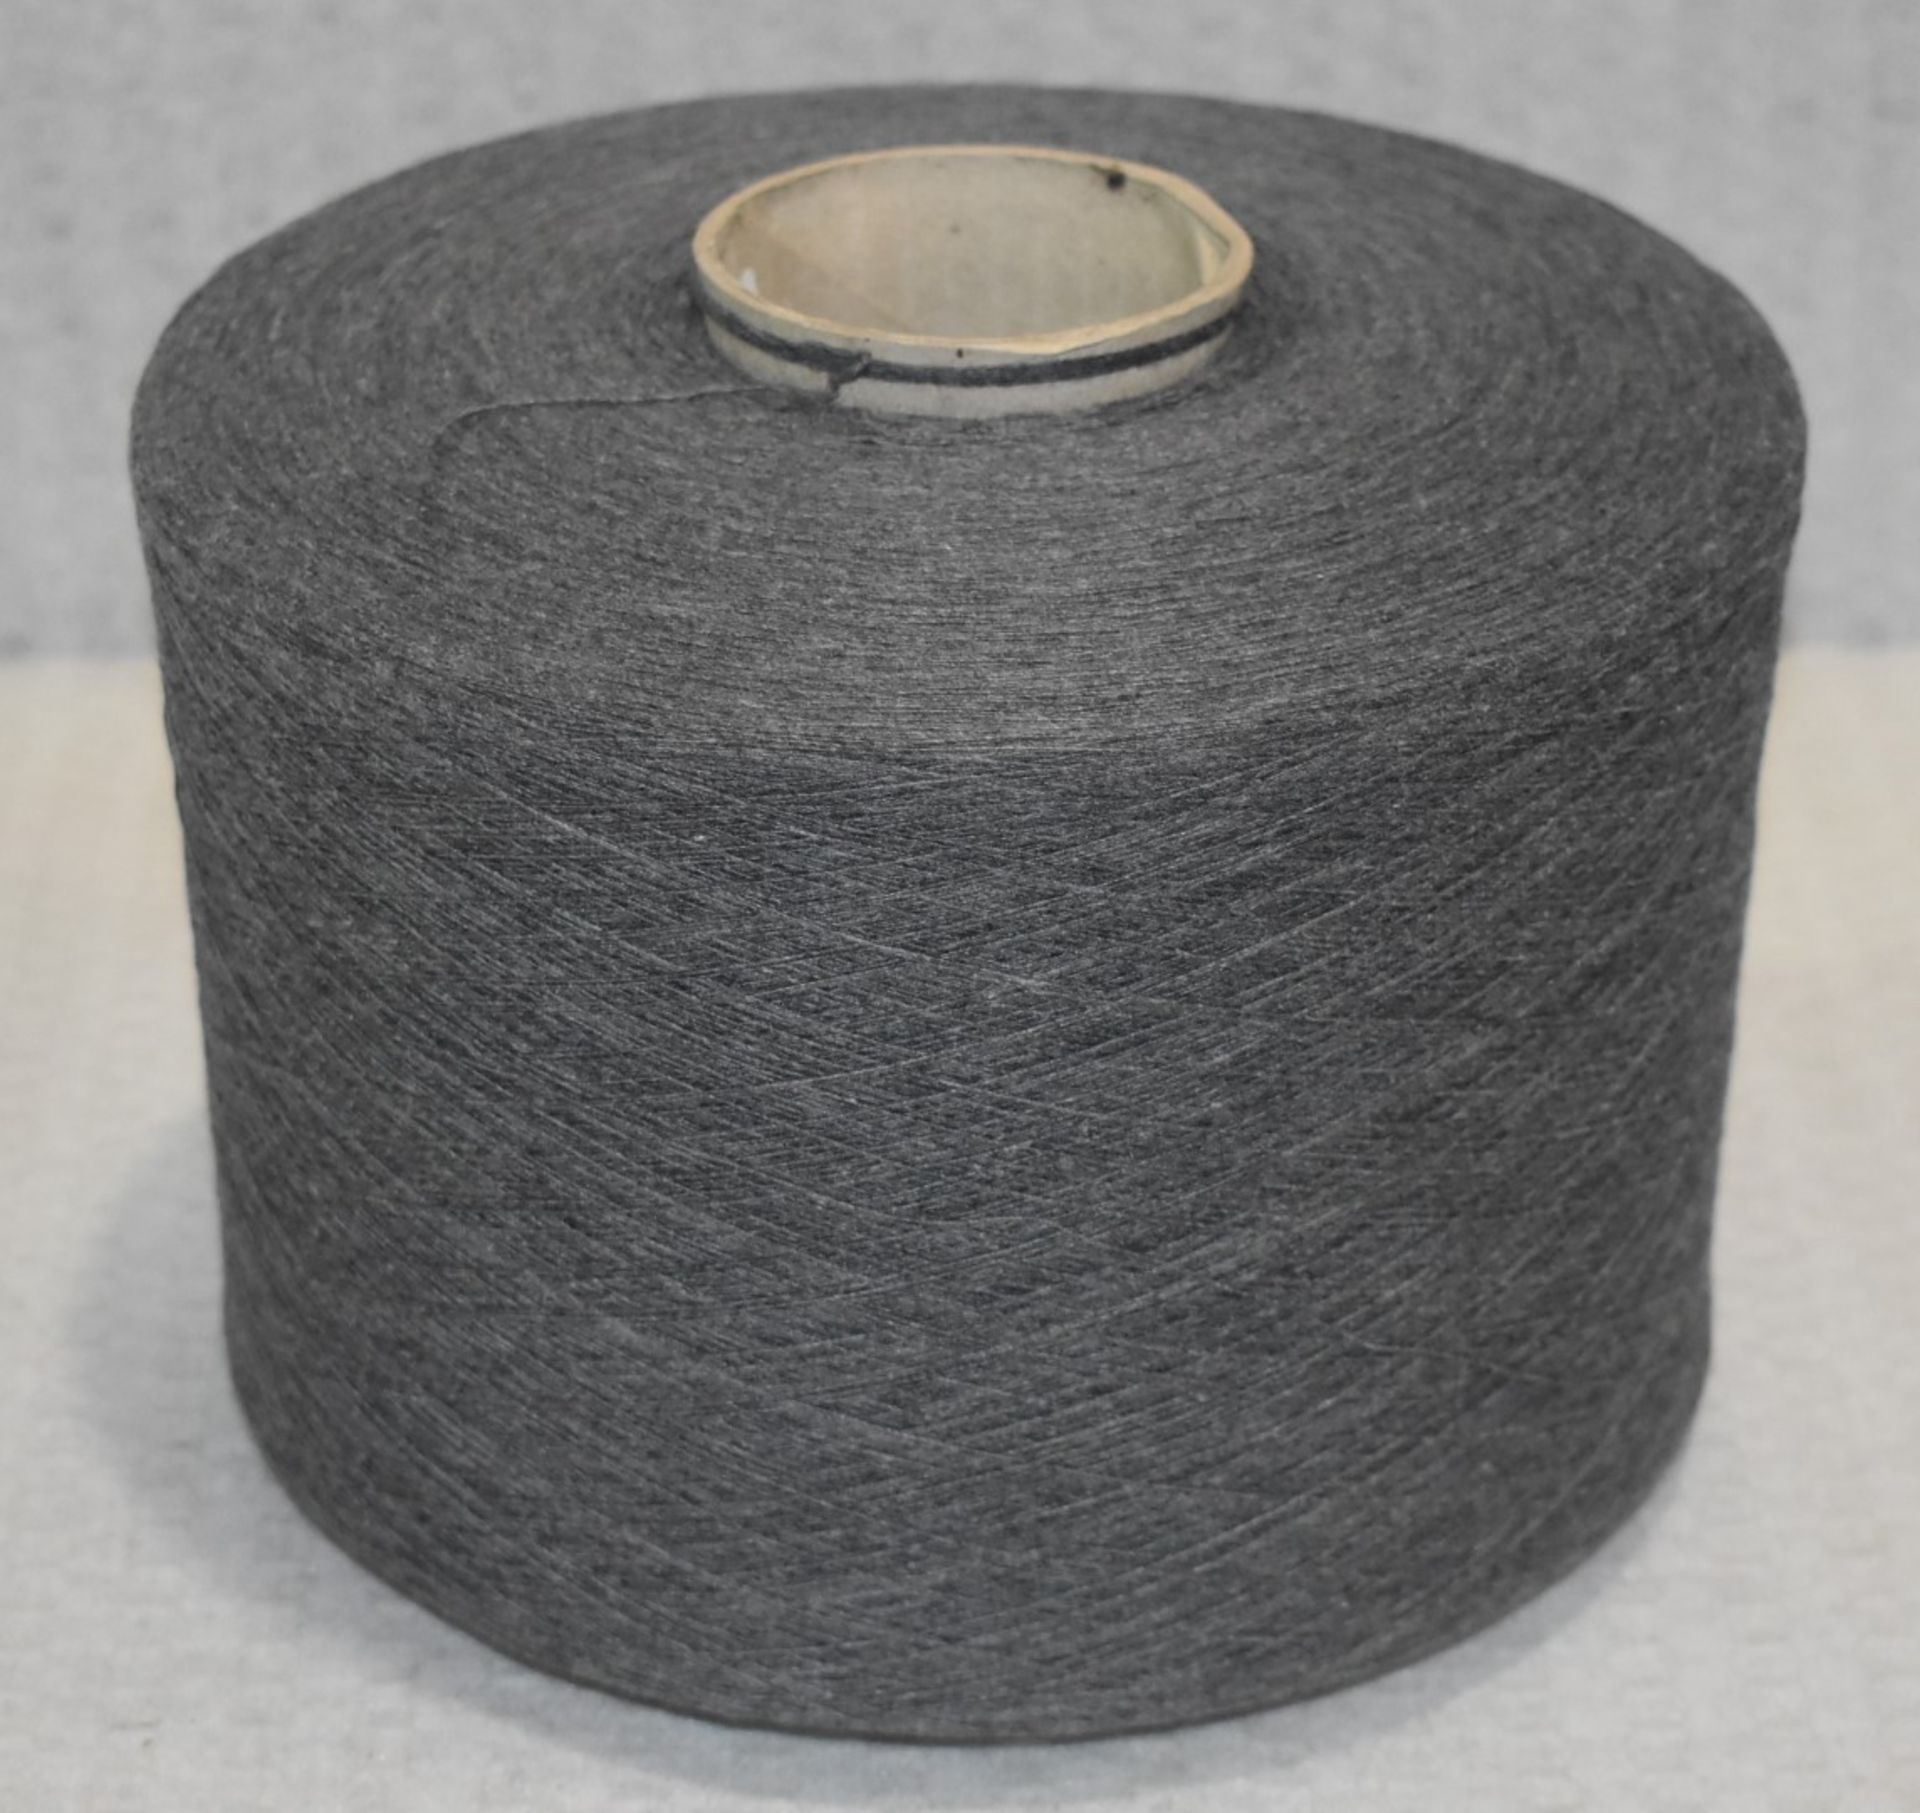 1 x Cone of 1/13 MicroCotton Knitting Yarn - Mid Grey - Approx Weight: 2,500g - New Stock ABL Yarn - Image 15 of 18